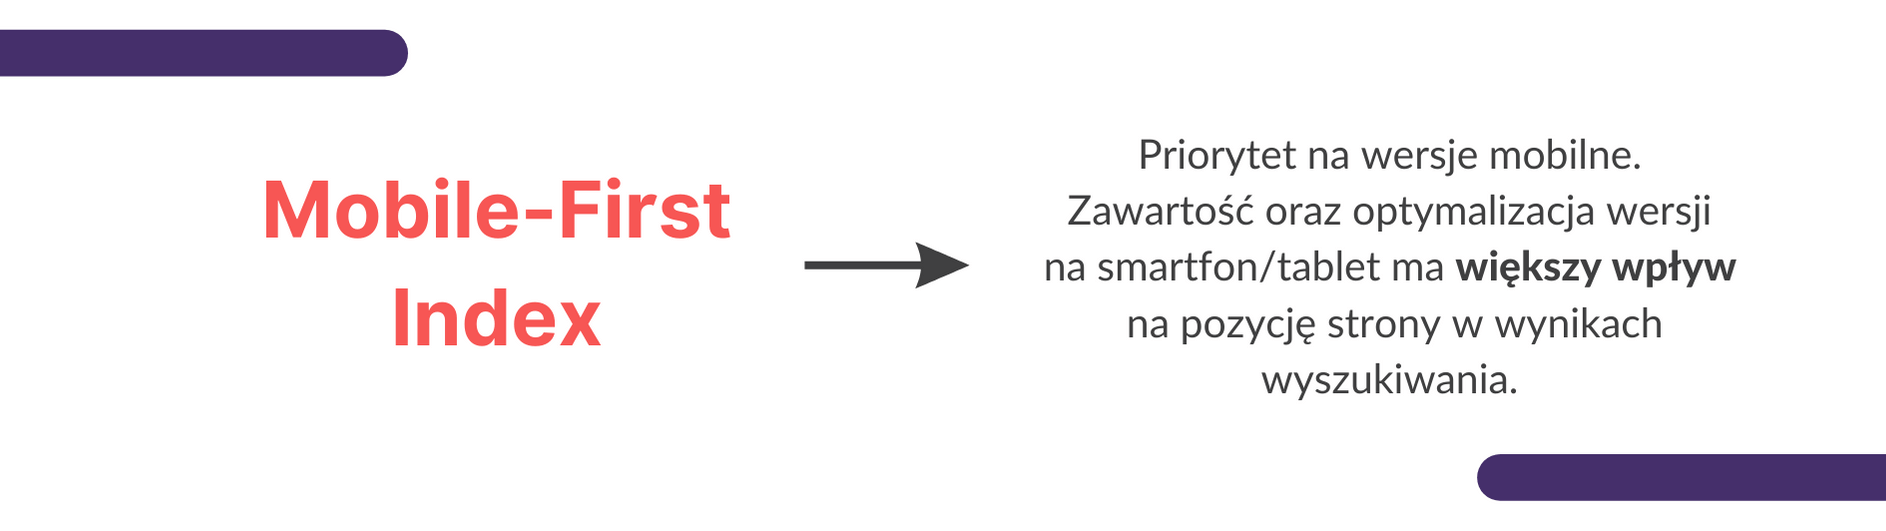 co-to-jest-mobile-first-index